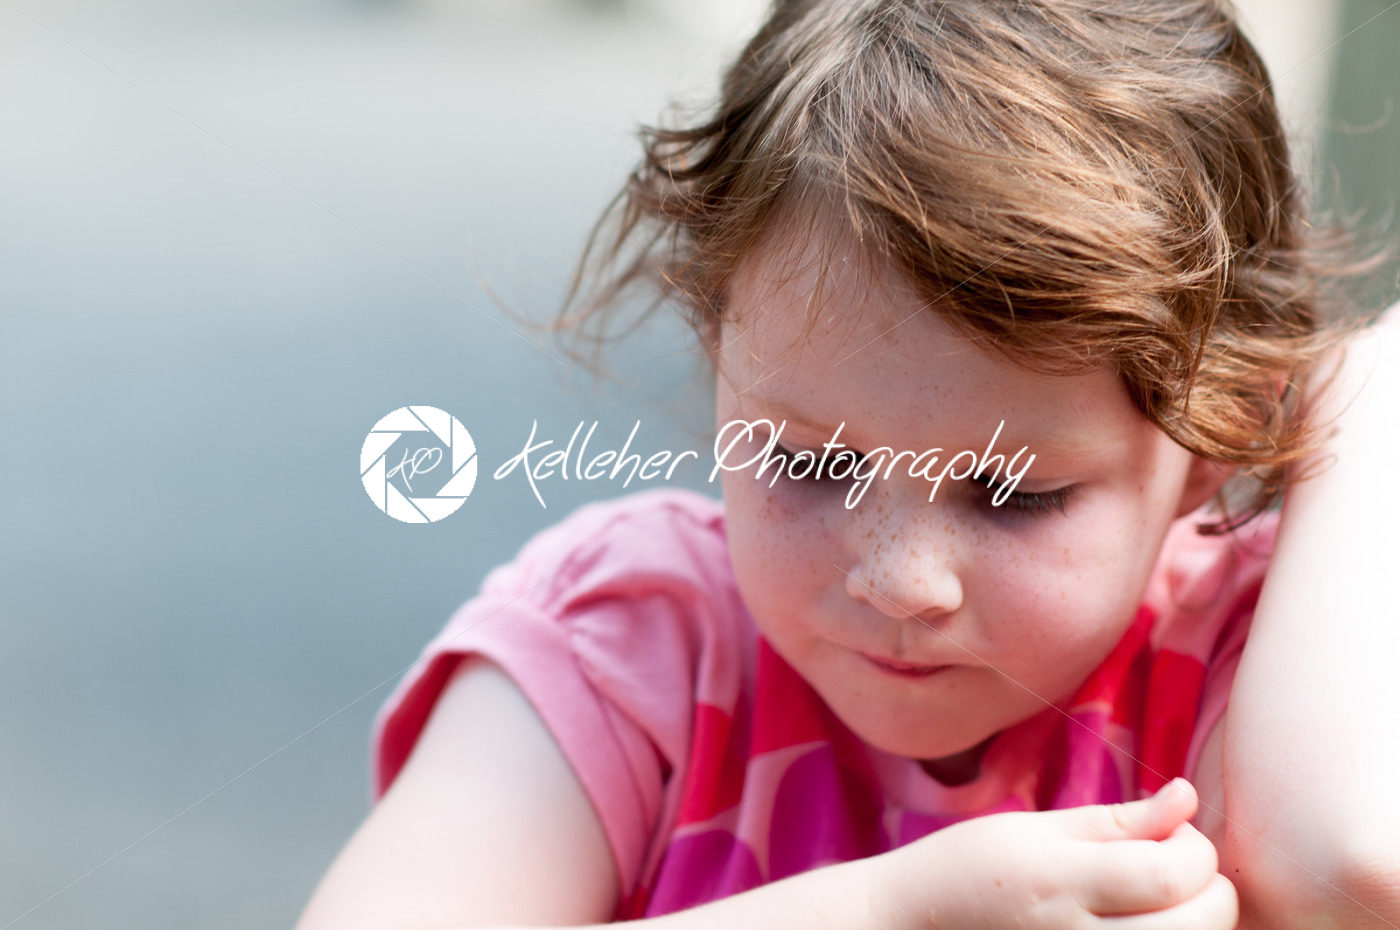 Portrait of young girl at sunset sitting down - Kelleher Photography Store